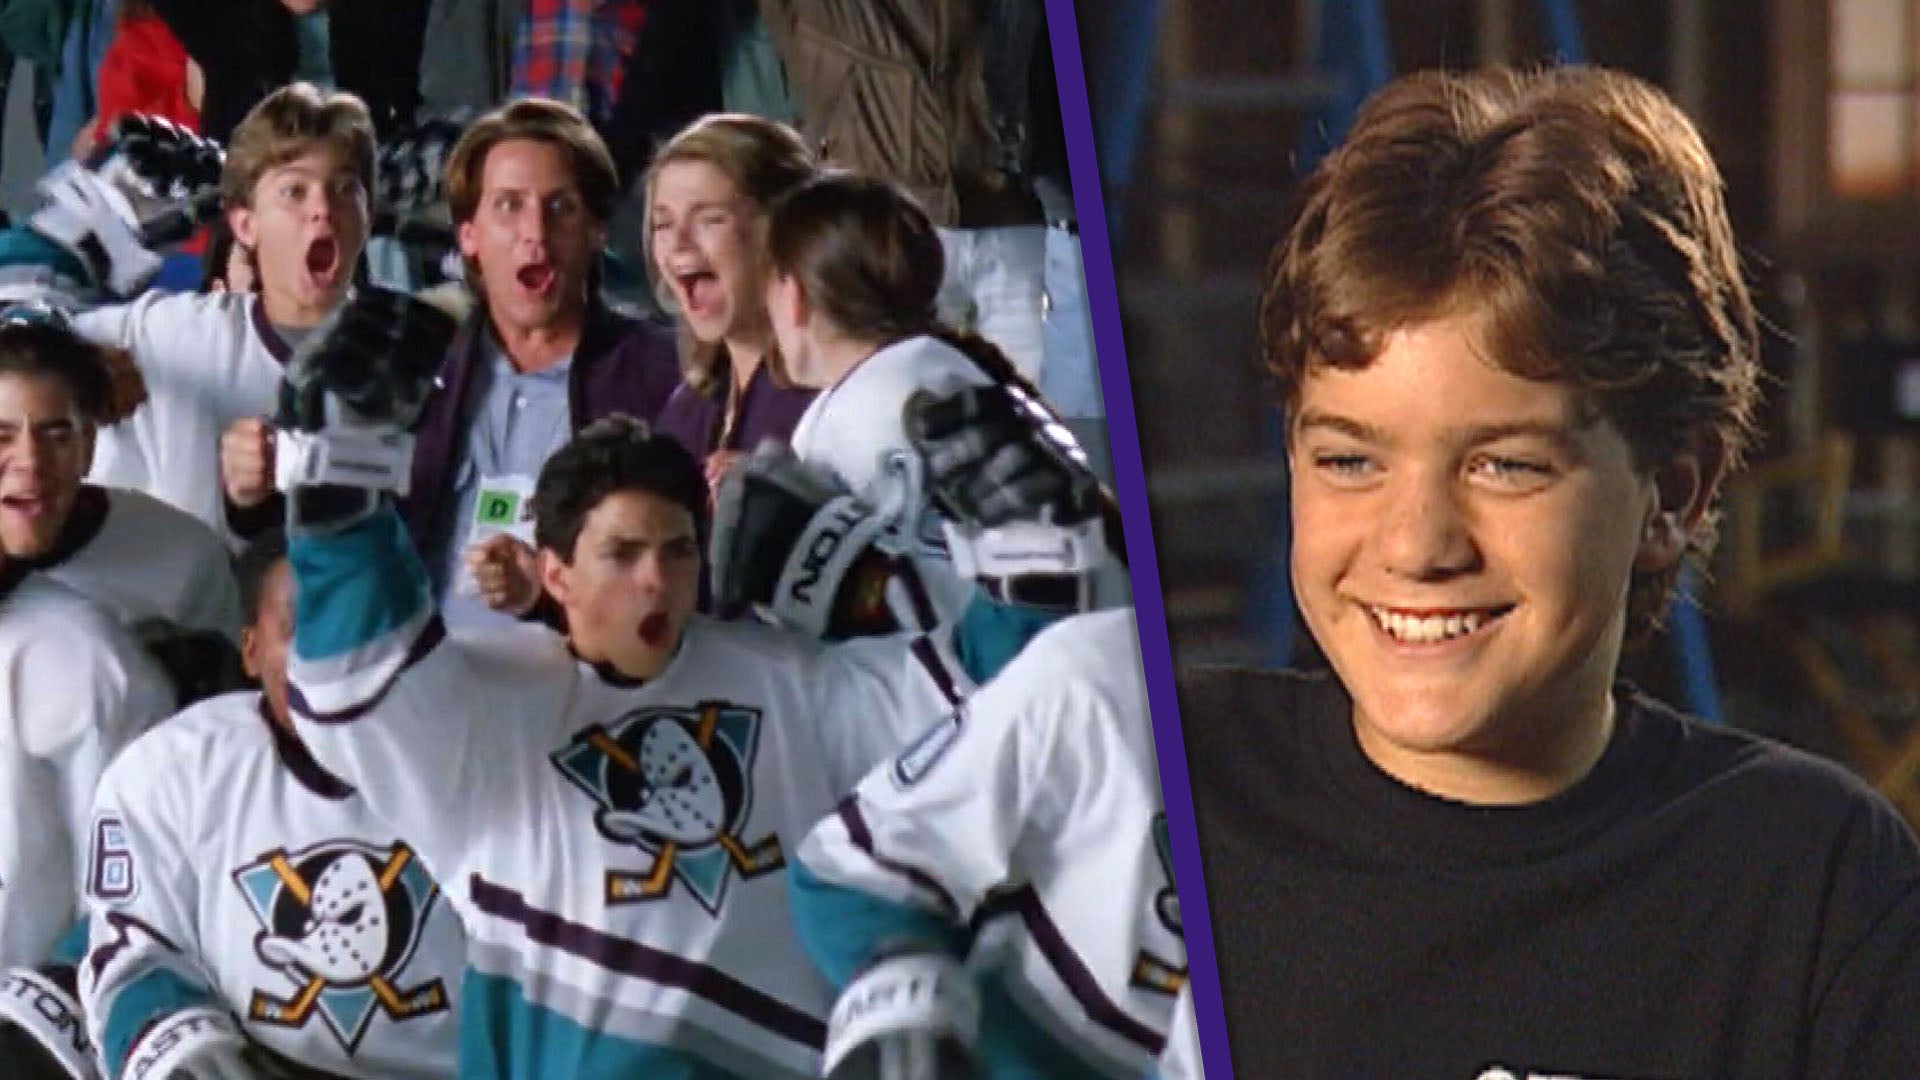 'D2: The Mighty Ducks' Turns 30! Watch Joshua Jackson and Cast’s Rare On-Set Interviews